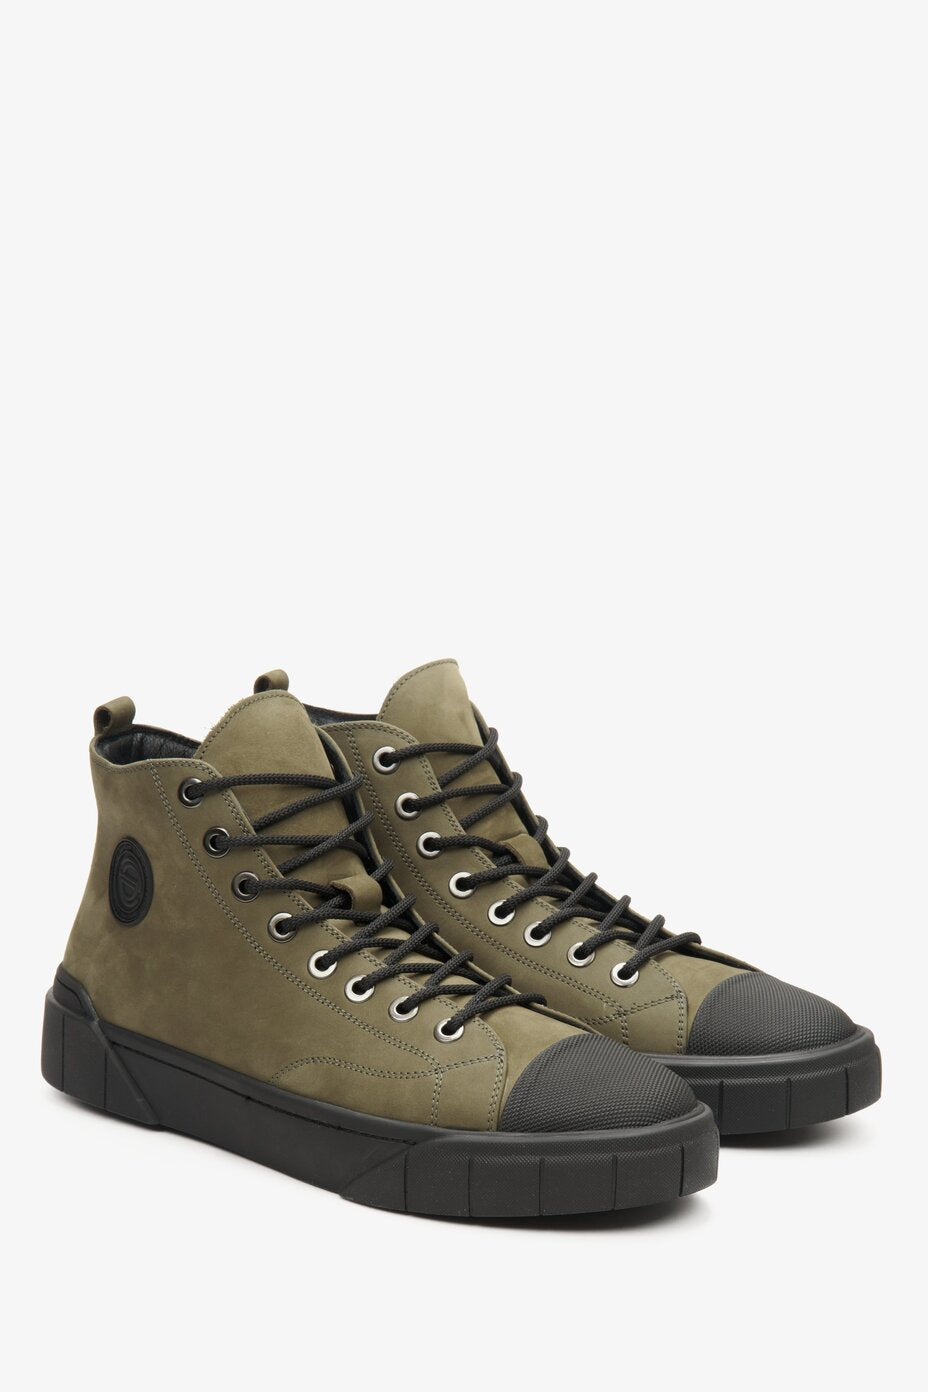 High-top green men's lace-up sneakers by Estro - presentation of a shoe toe and sideline.